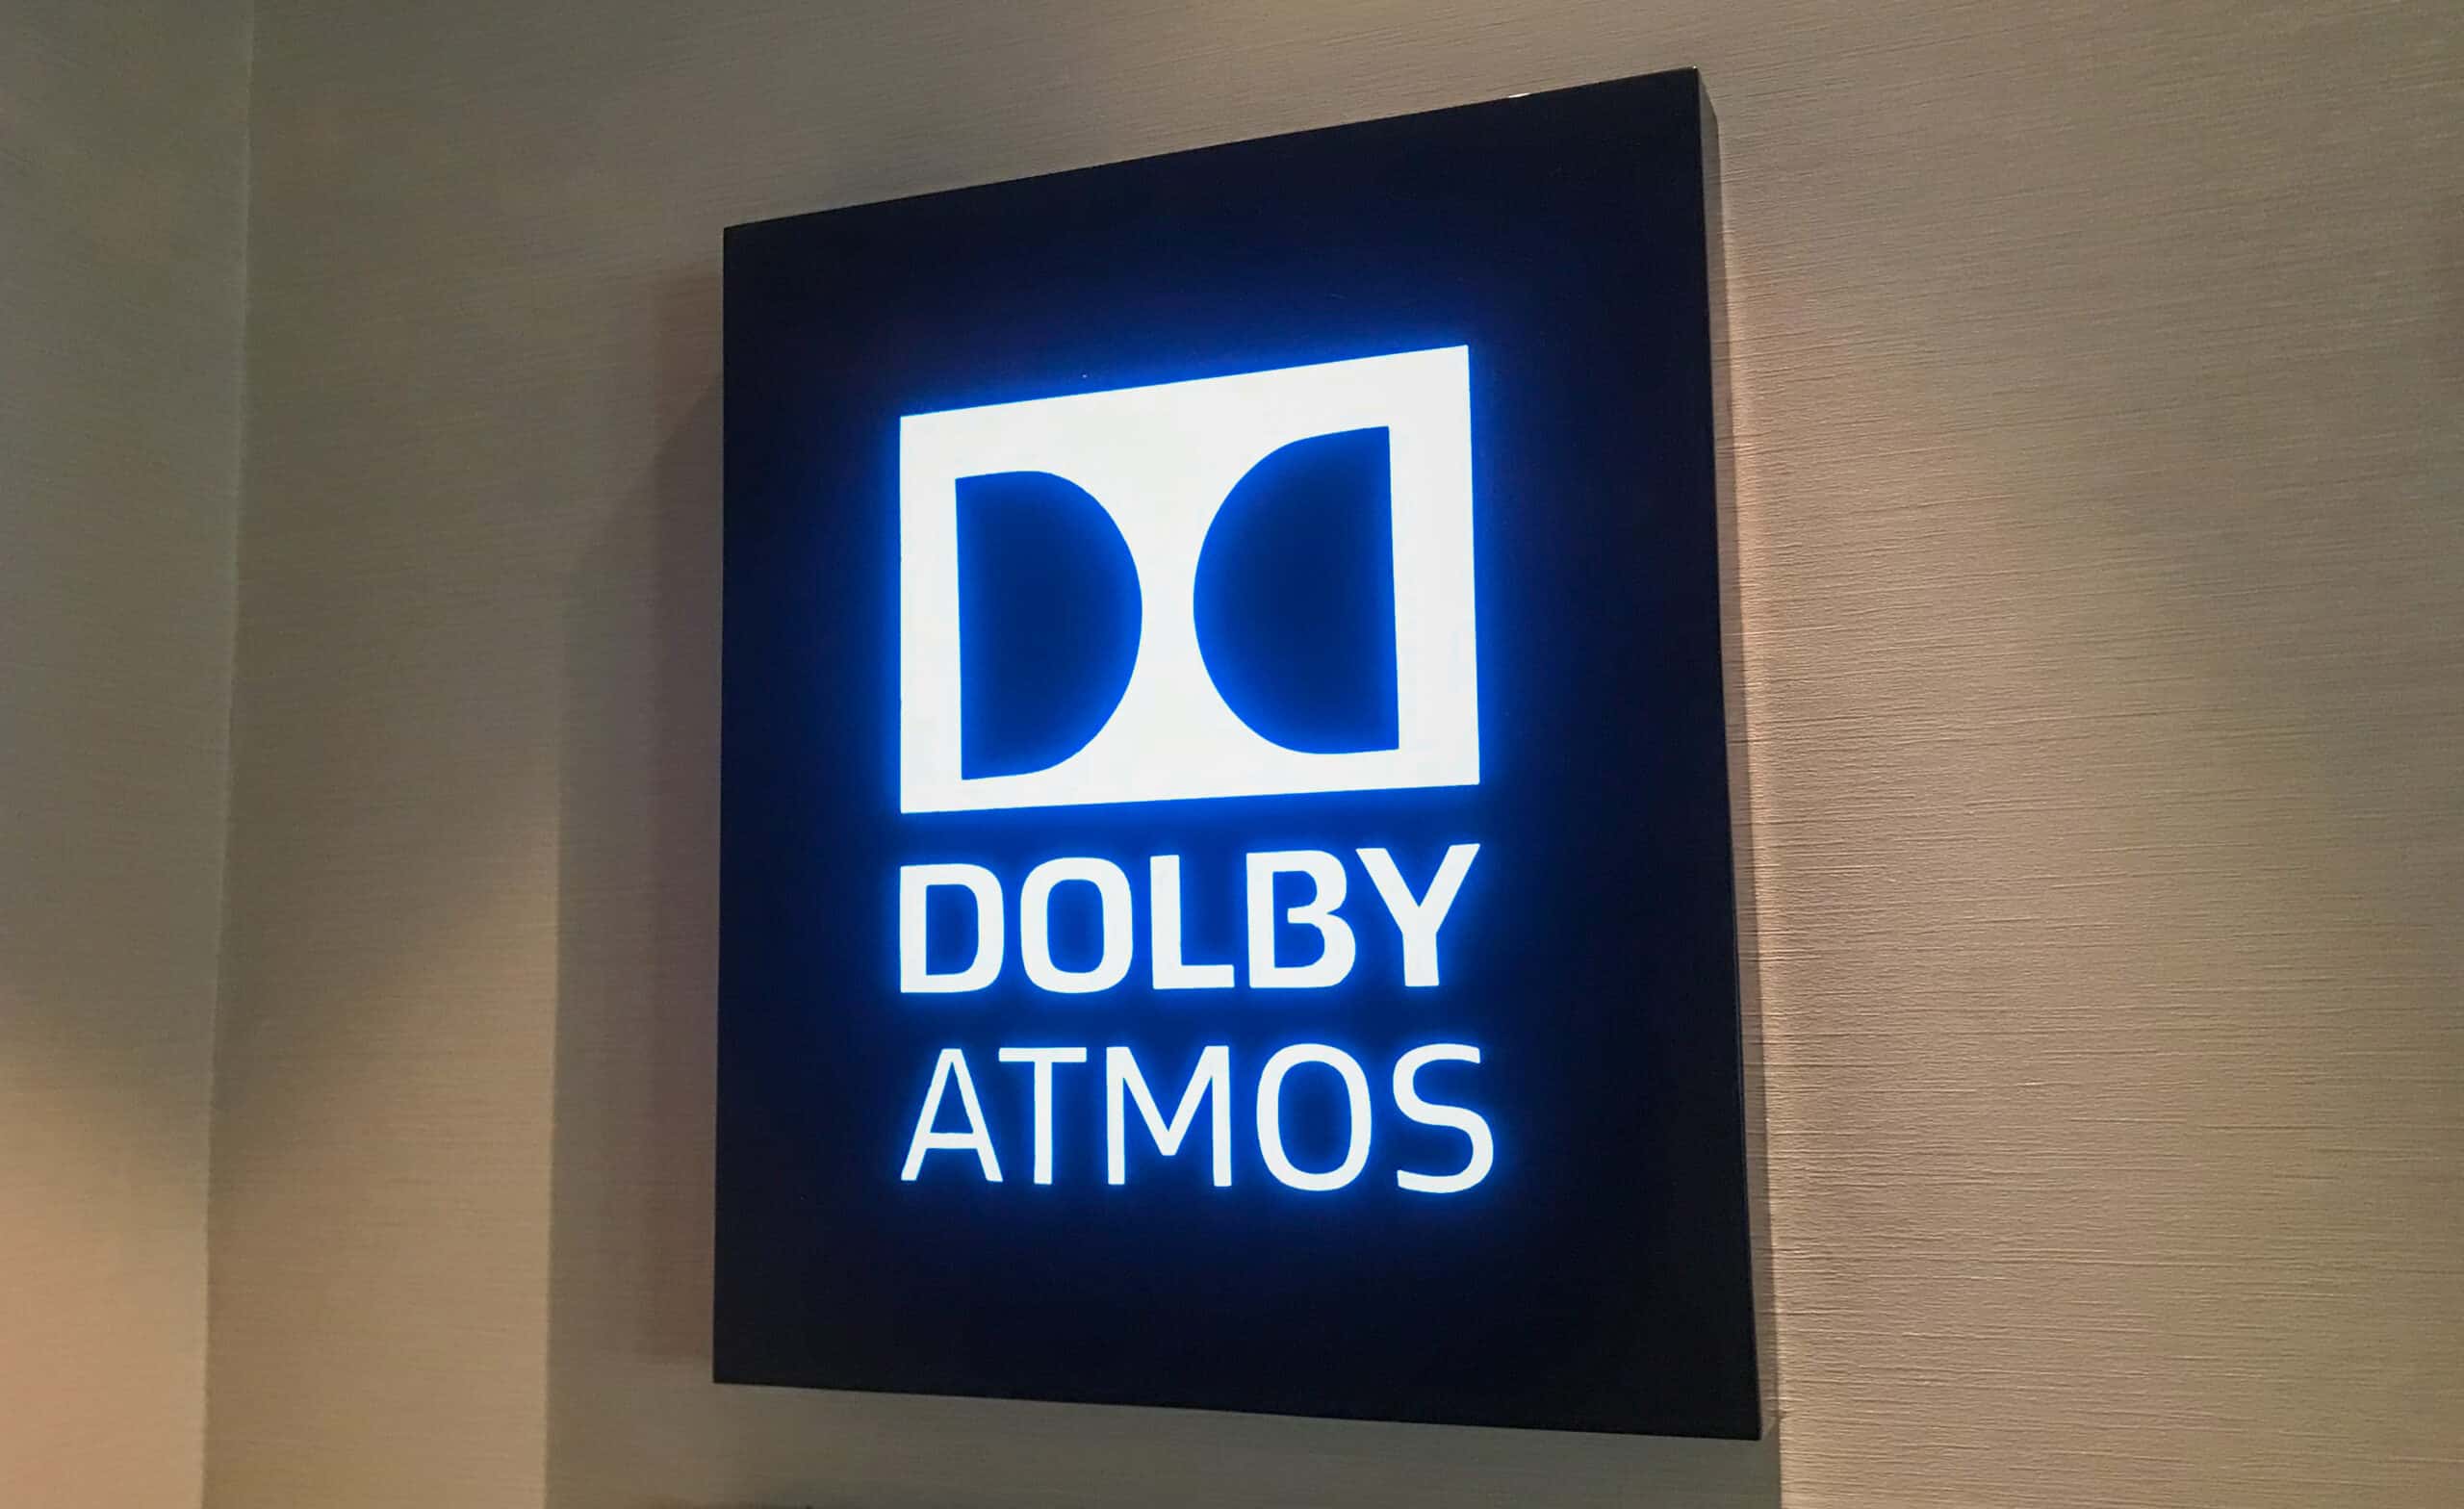 dolby atmos logo sign in a movie theatre